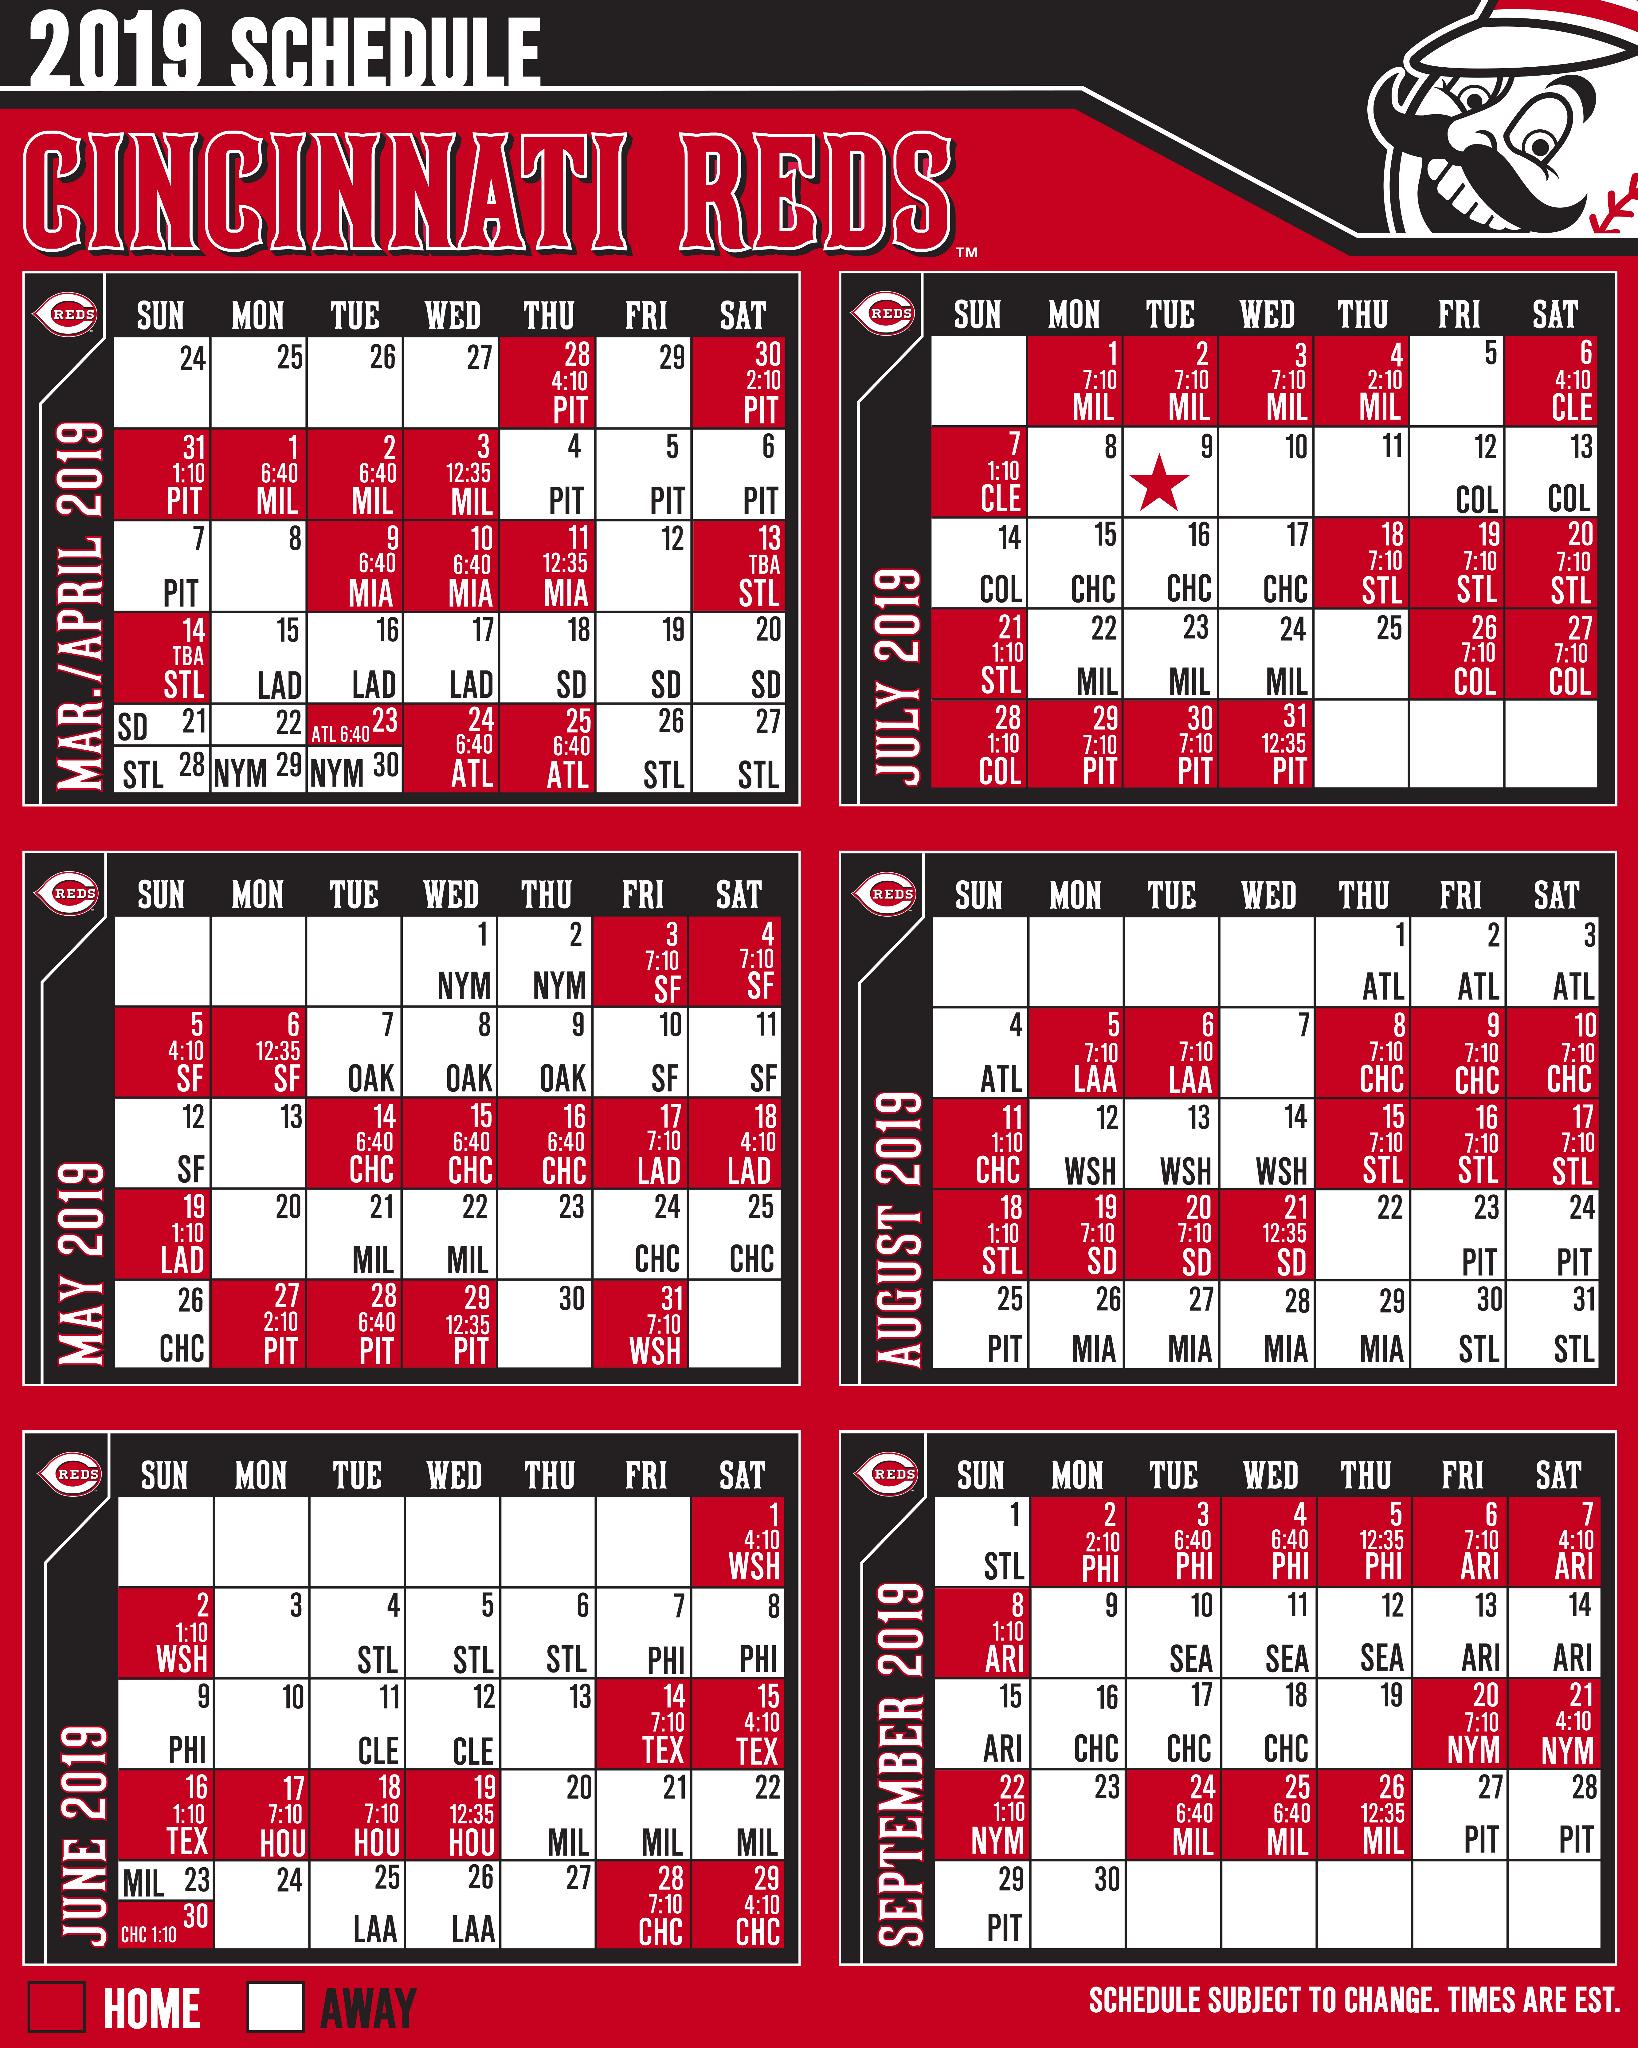 Cincinnati Reds on Twitter "Here is your 2019 Reds schedule. You may